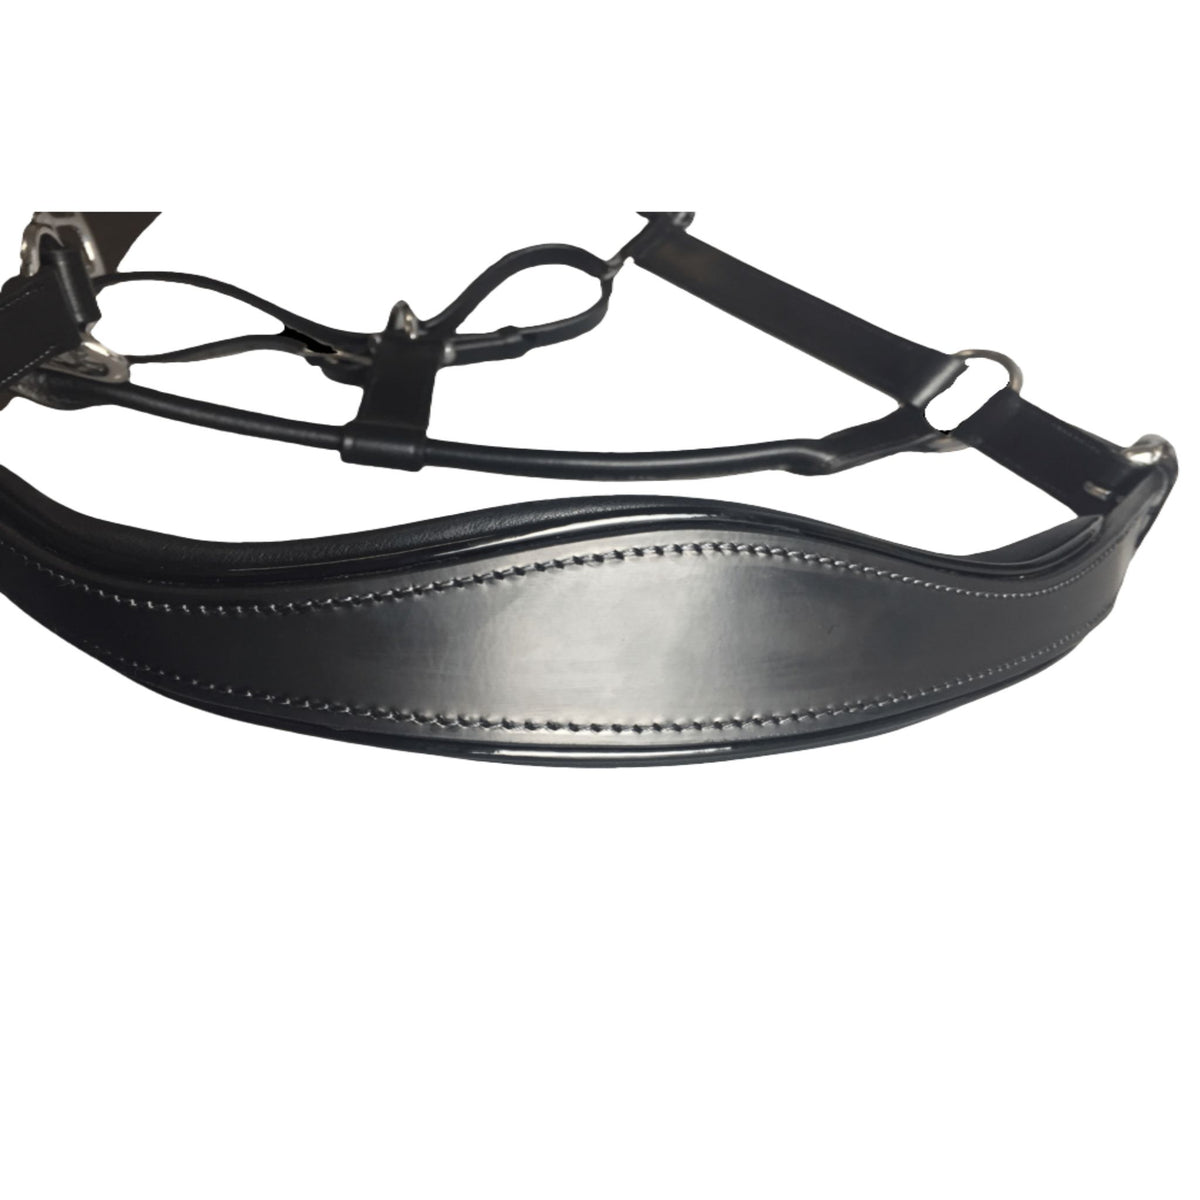 Close up of black patent leather halter, showing black stitching on top.